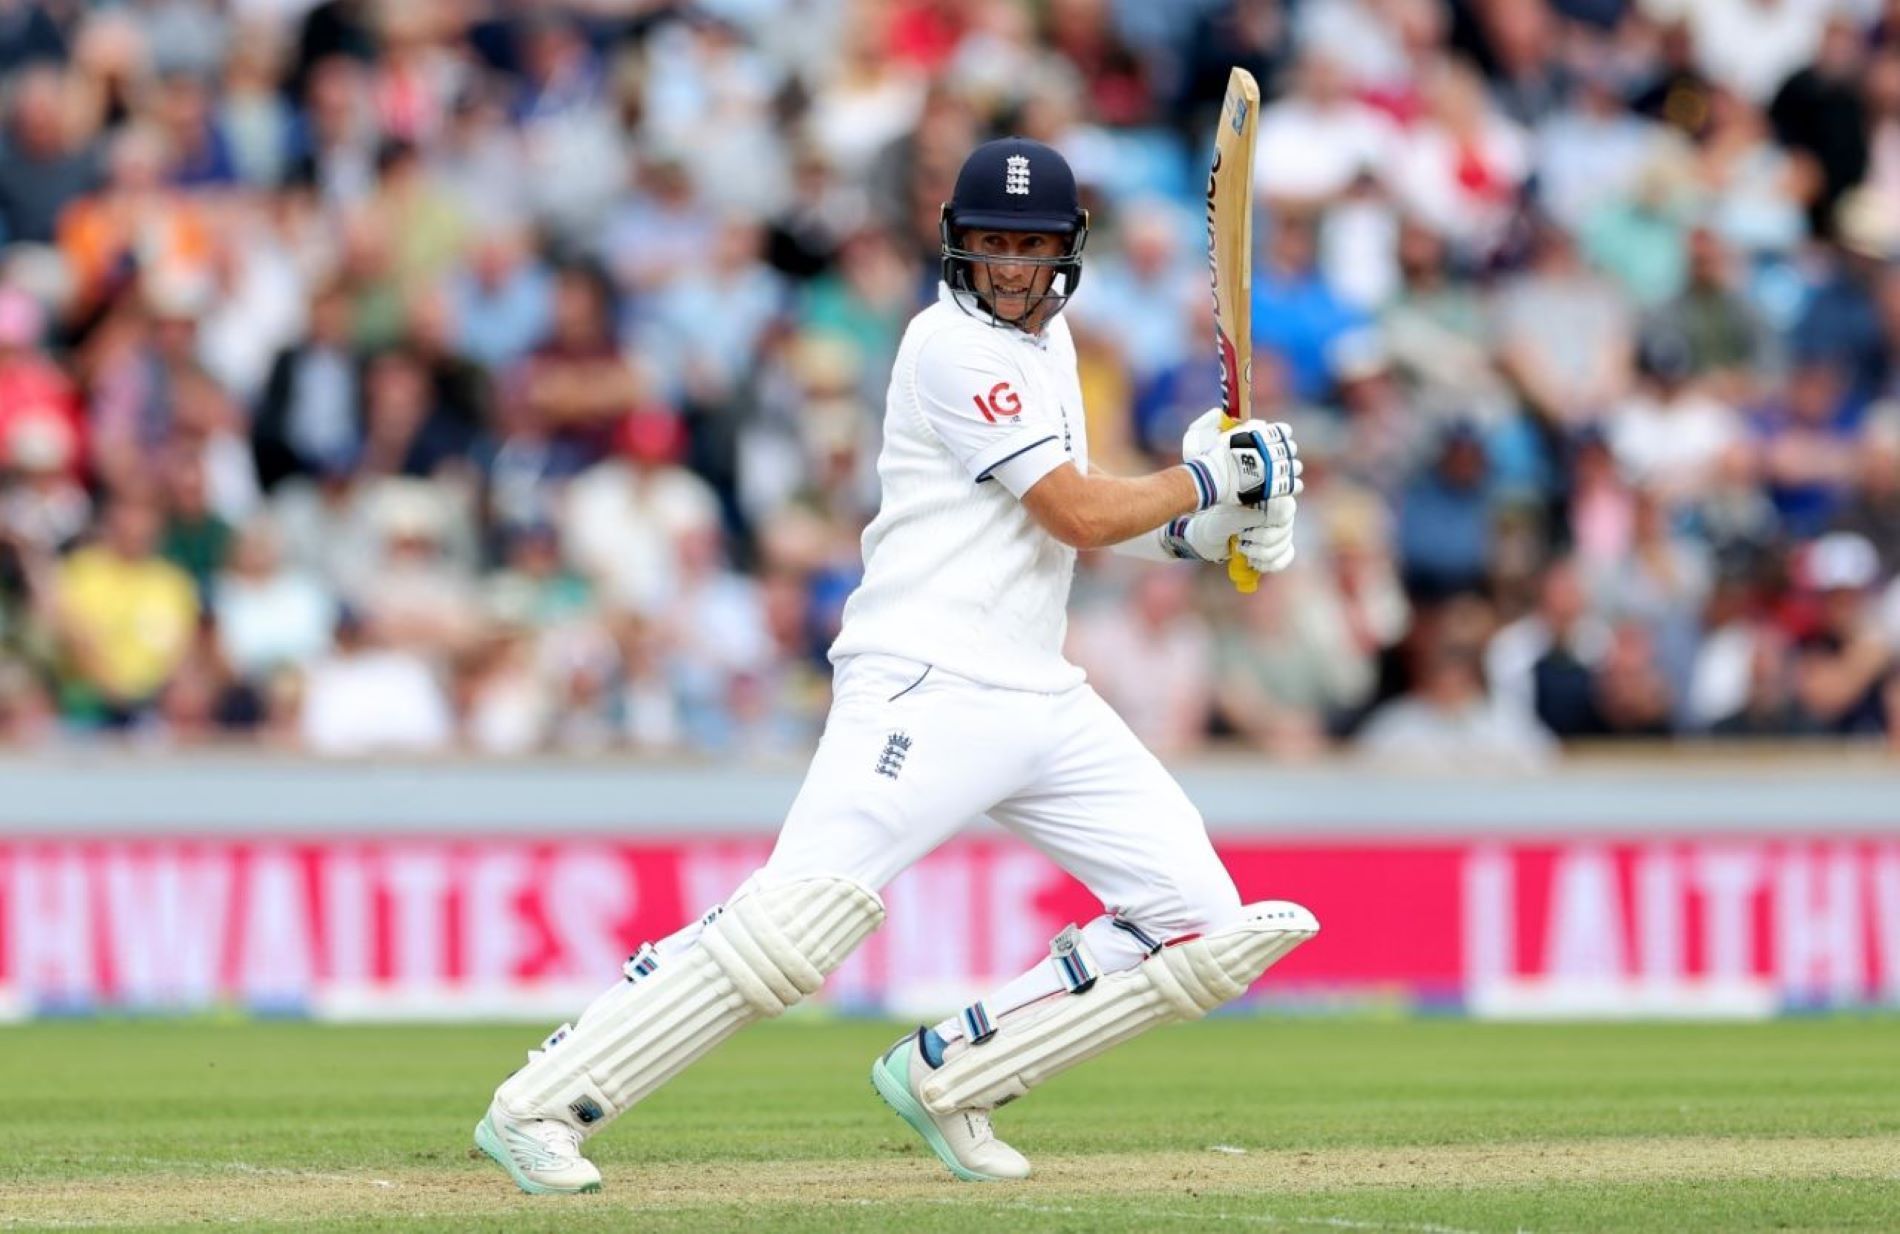 Joe Root will have a vital role on Day 2 for England to take control of the game.